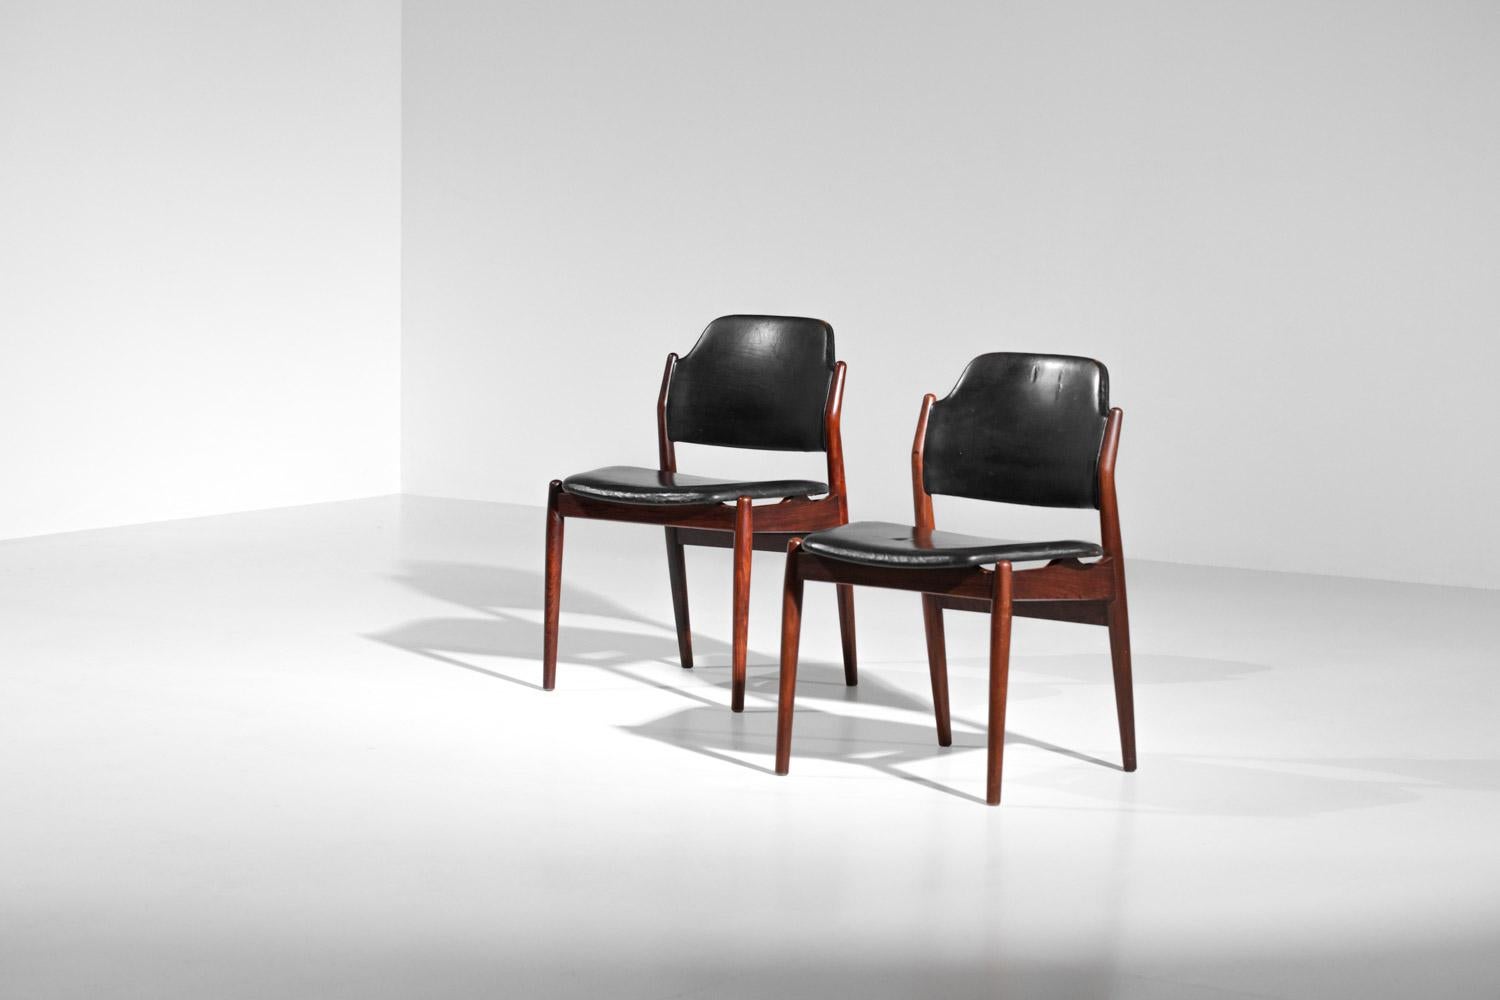 Pair of Scandinavian chairs from the 1960s by Swedish designer Arne Vodder edited by Sibast. Structure in solid wood, seats and backs in black leather. Sober and pure lines typical of the Scandinavian design of the time. Very nice vintage condition,